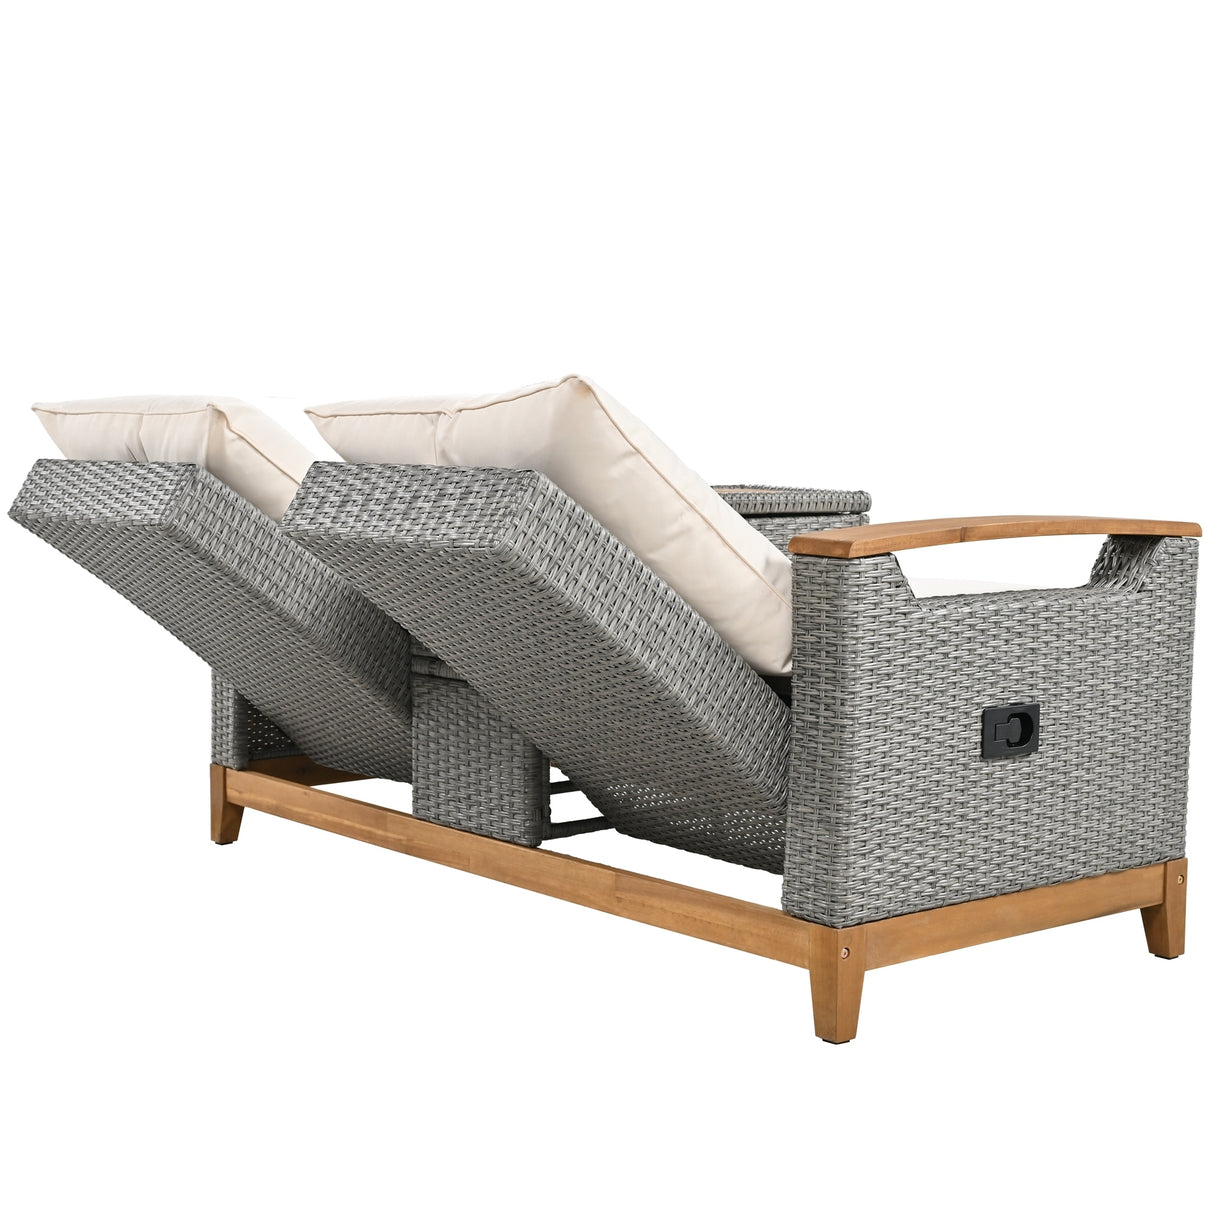 【Not allowed to sell to Wayfair】U_Style Outdoor Comfort Adjustable Loveseat,Armrest With Storage Space With 2 Colors,Suitable For Courtyards, Swimming Pools And Balconies, etc.